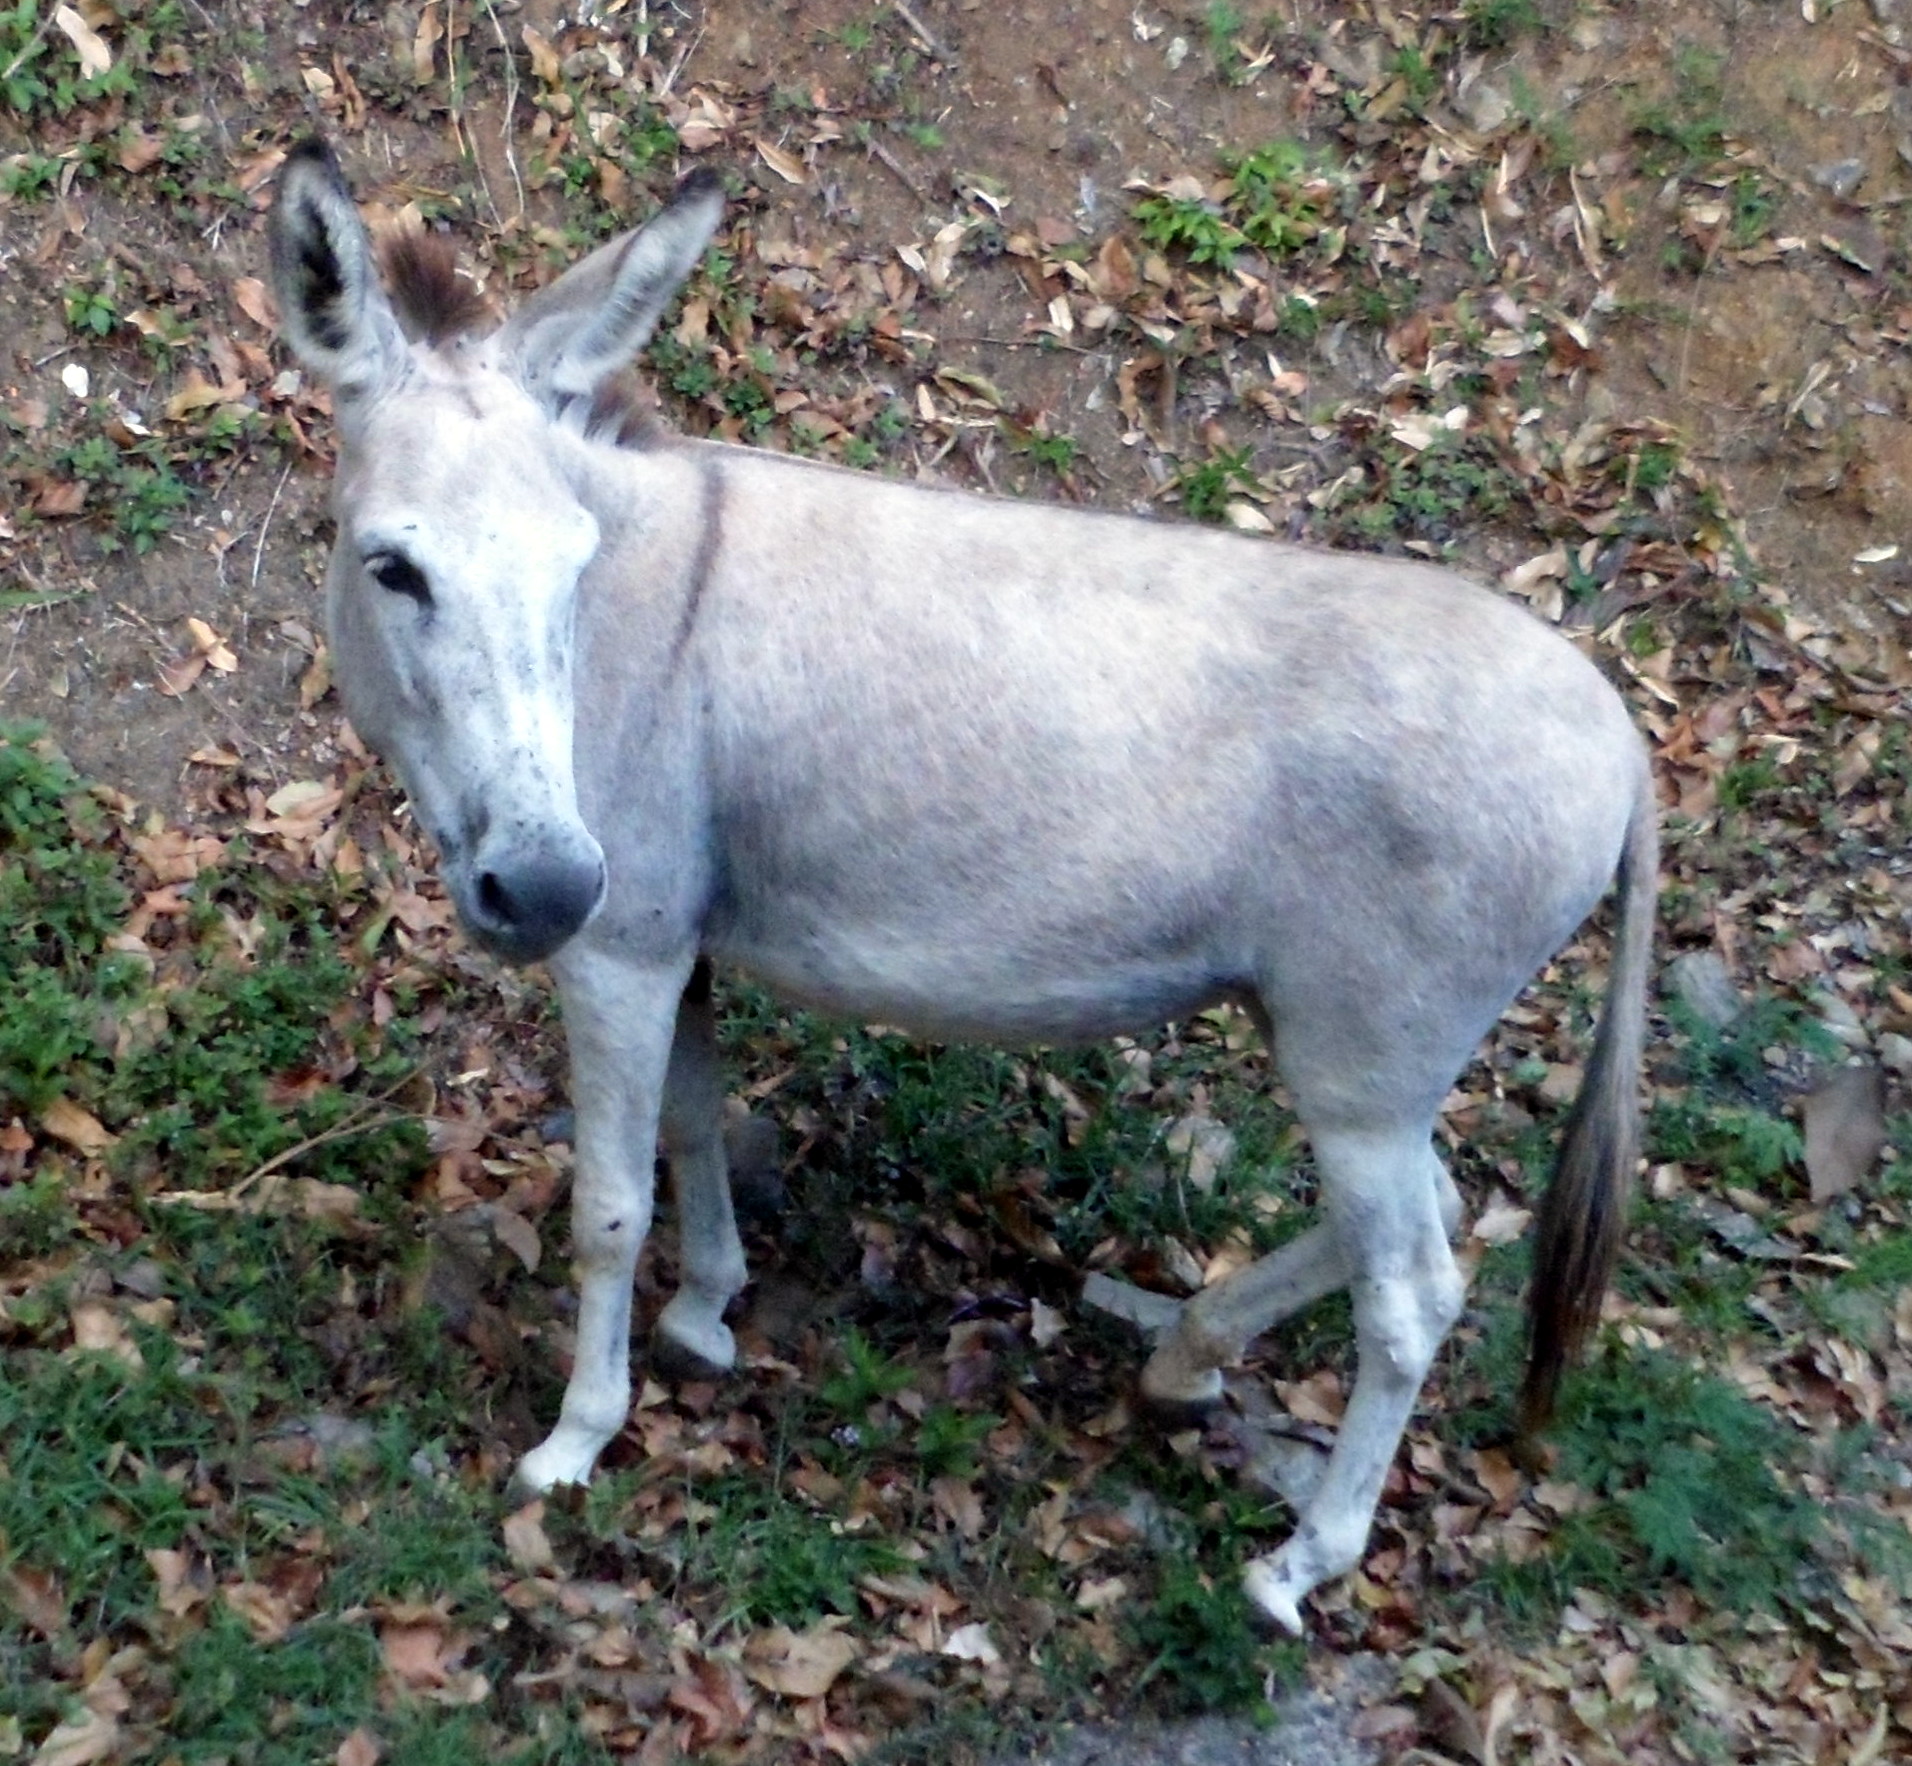 a shaved donkey with an orange nose and long tail